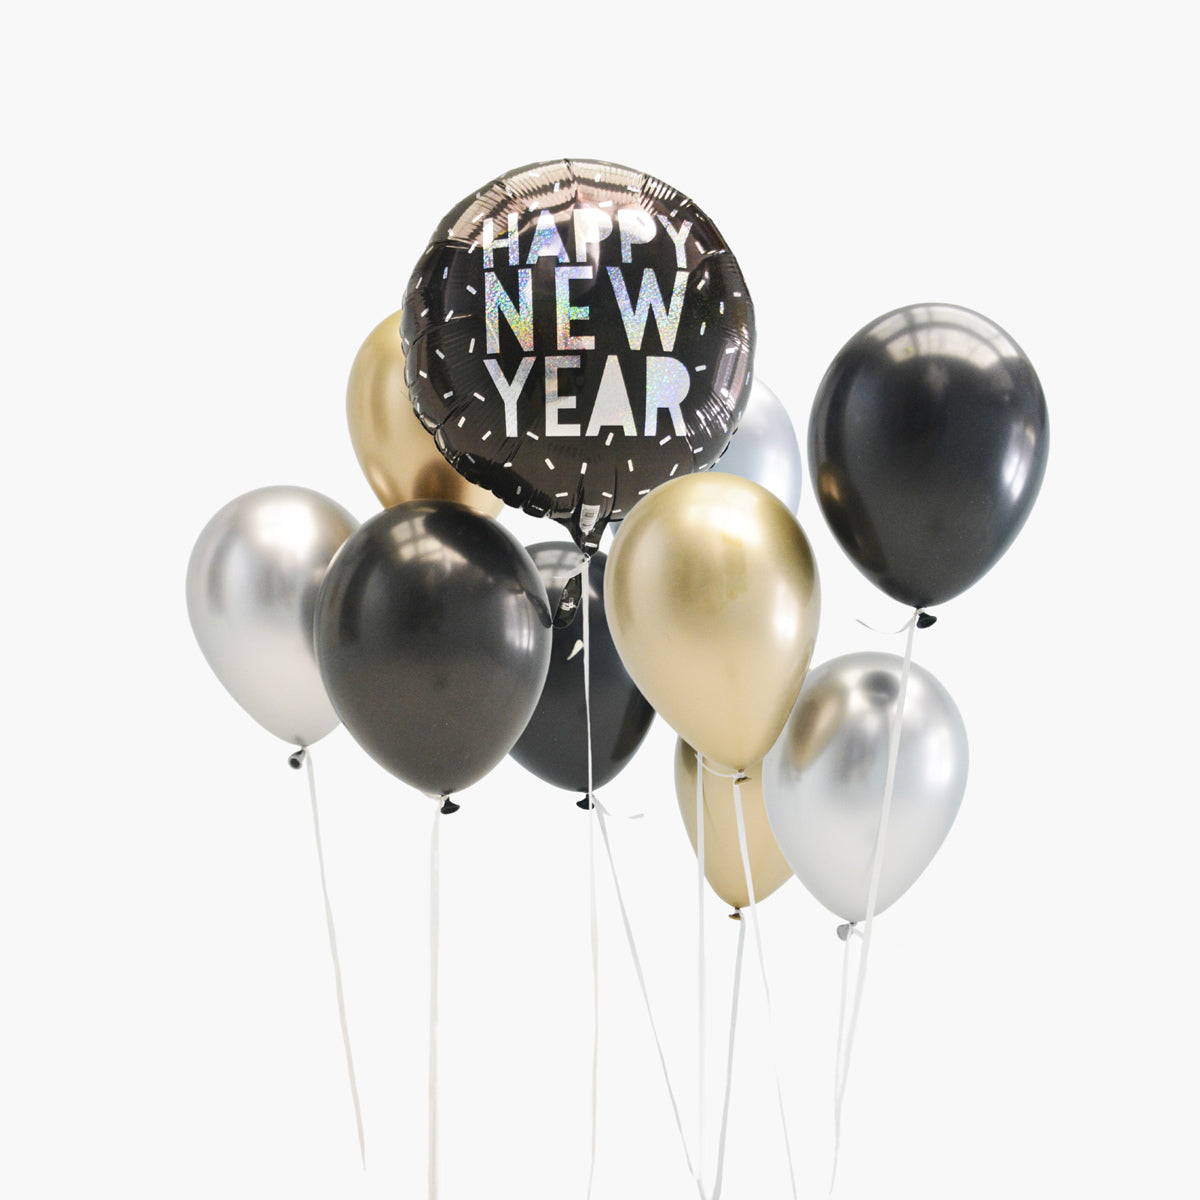 Happy New Year Balloon Bouquet - Modern New Year Party Decorations in Gold, Silver and Balck